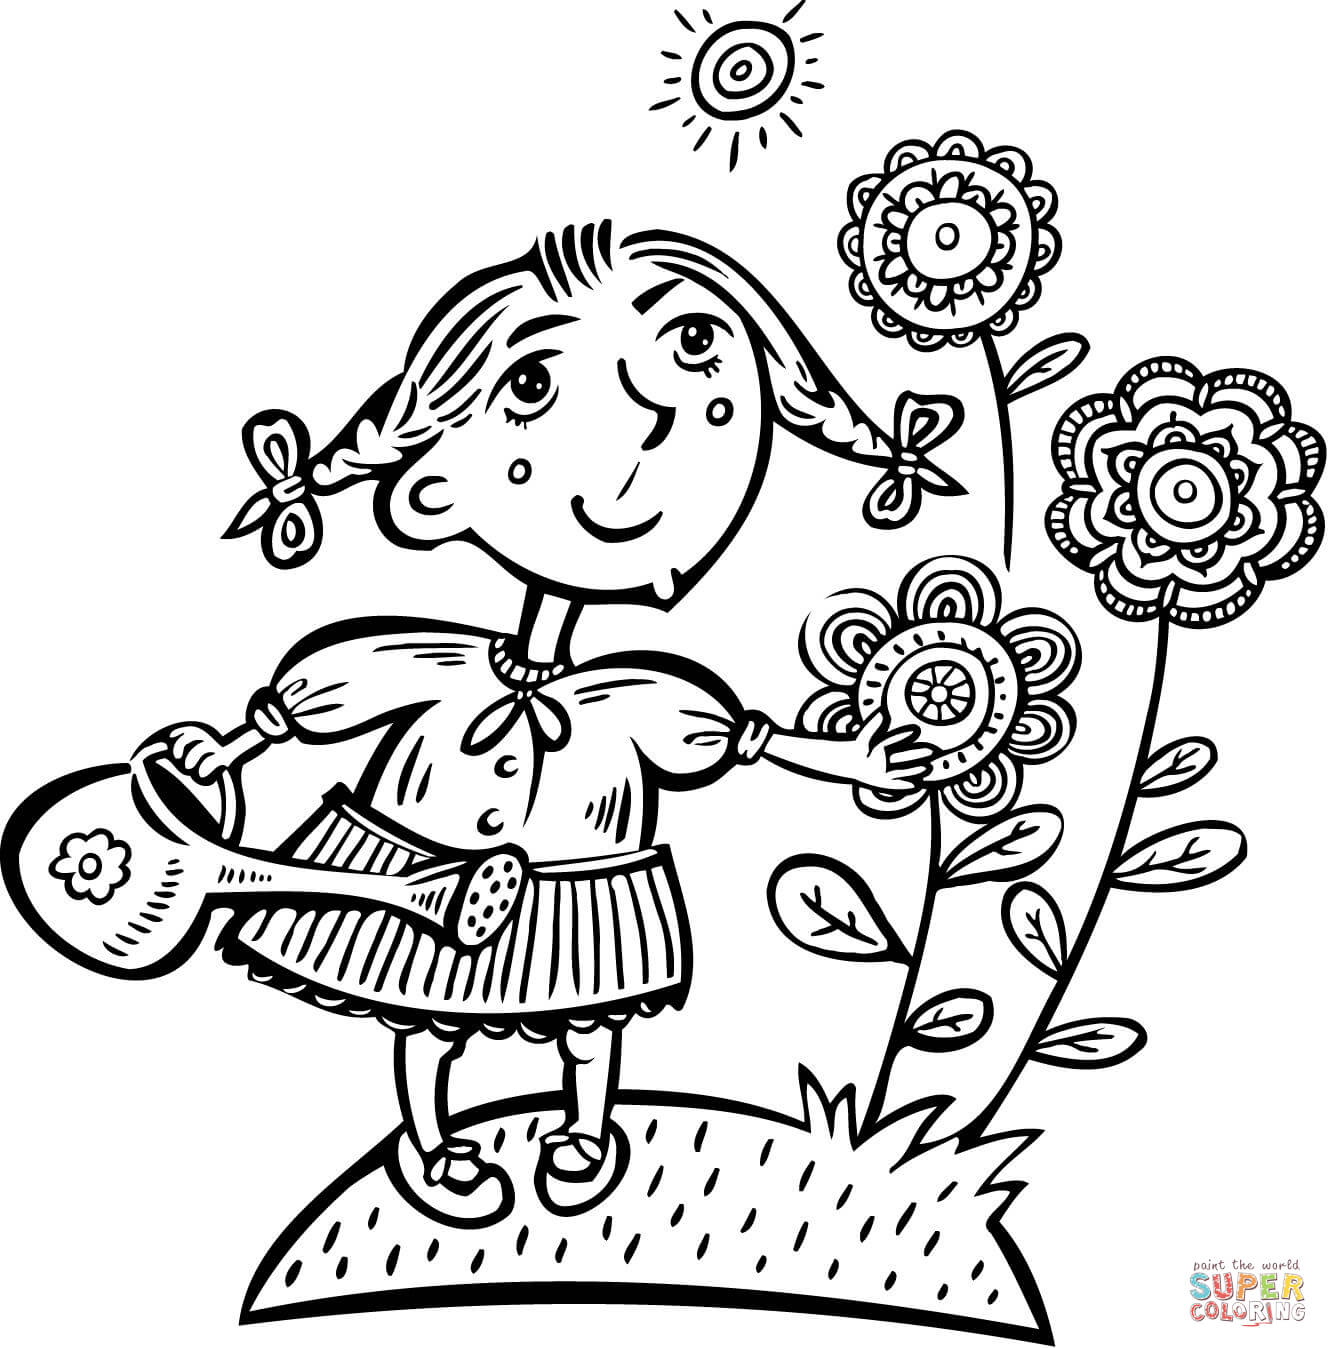 Girl Picking Flowers coloring page | Free Printable Coloring Pages